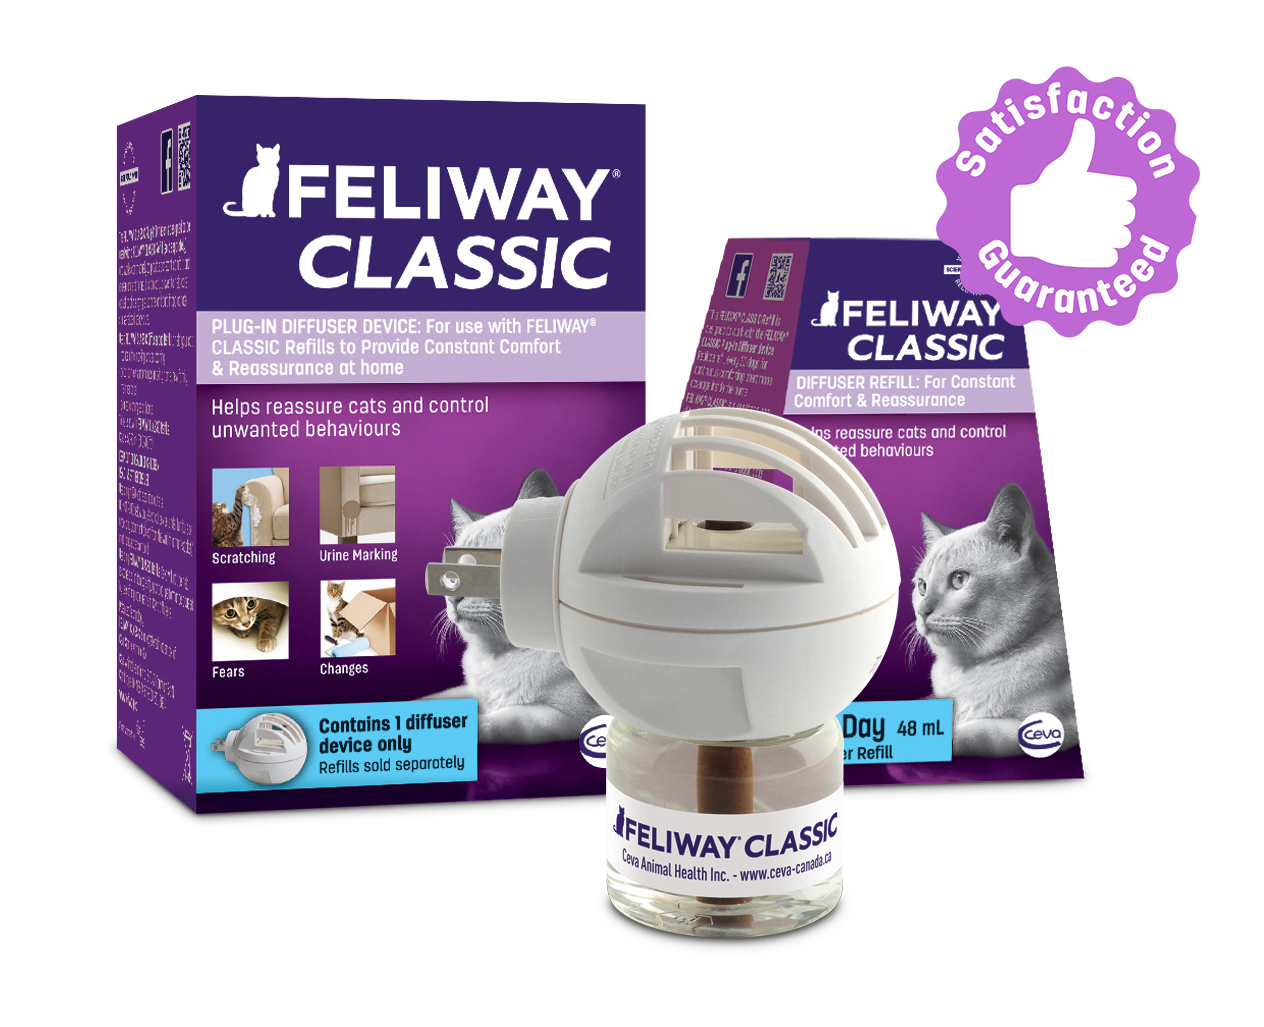 FELIWAY CLASSIC or FELIWAY FRIENDS? What's The Difference?